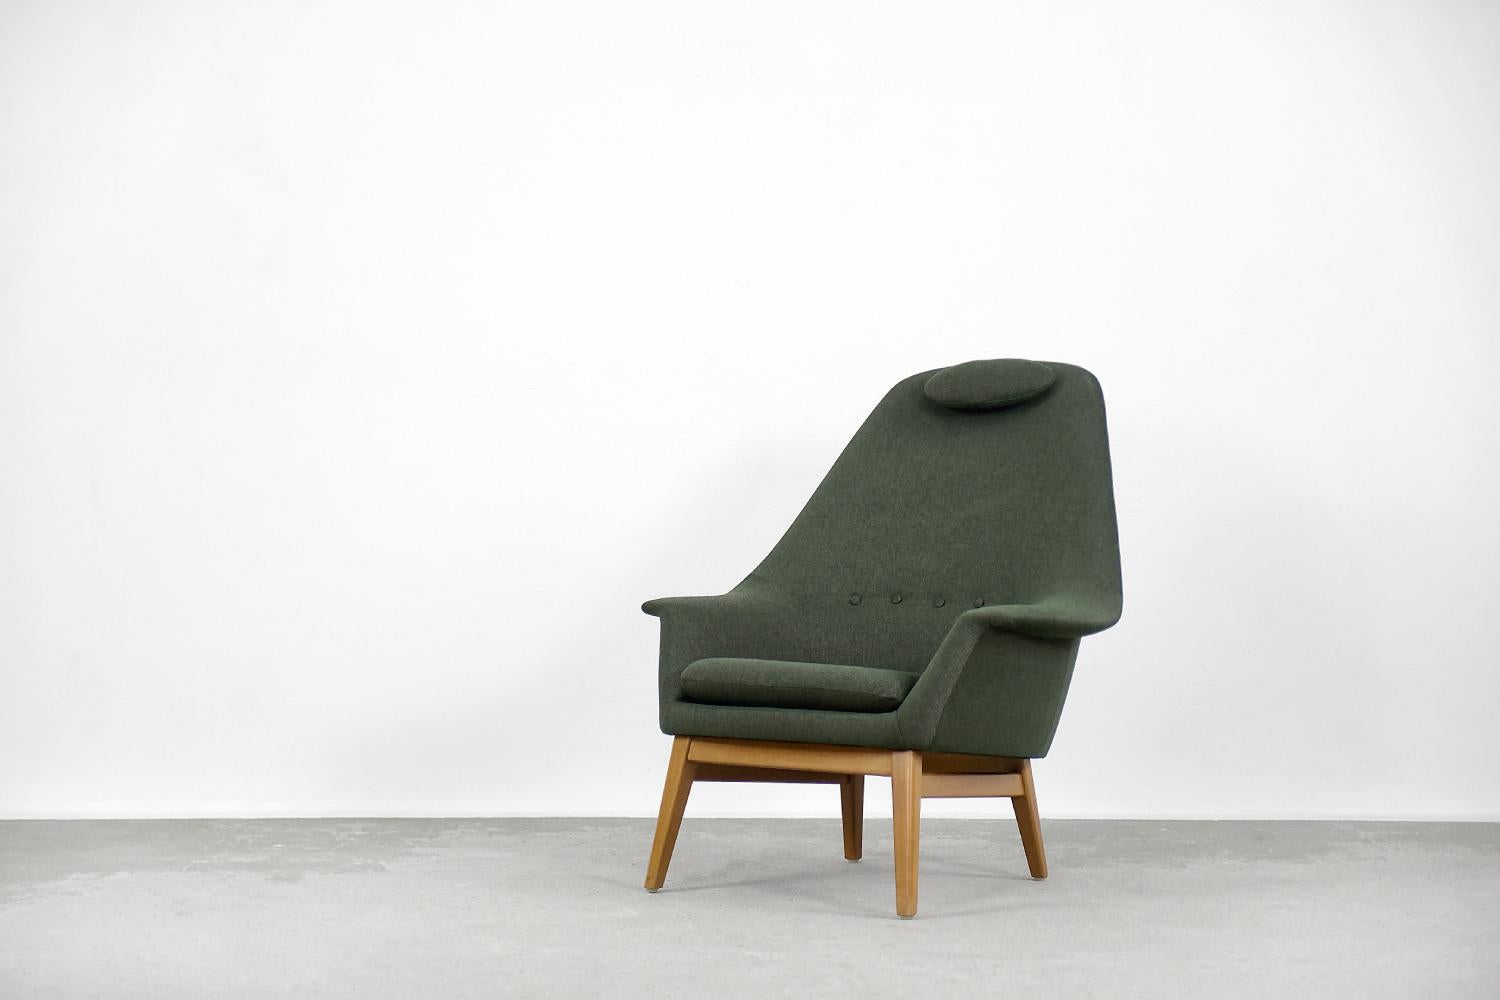 This rare form armchair was made in Scandinavia during the 1950s. The organic form of the backrest gently transforms into wide armrests resembling wings. The armchair has a small pillow under the head, which is attached with a leather strap. This